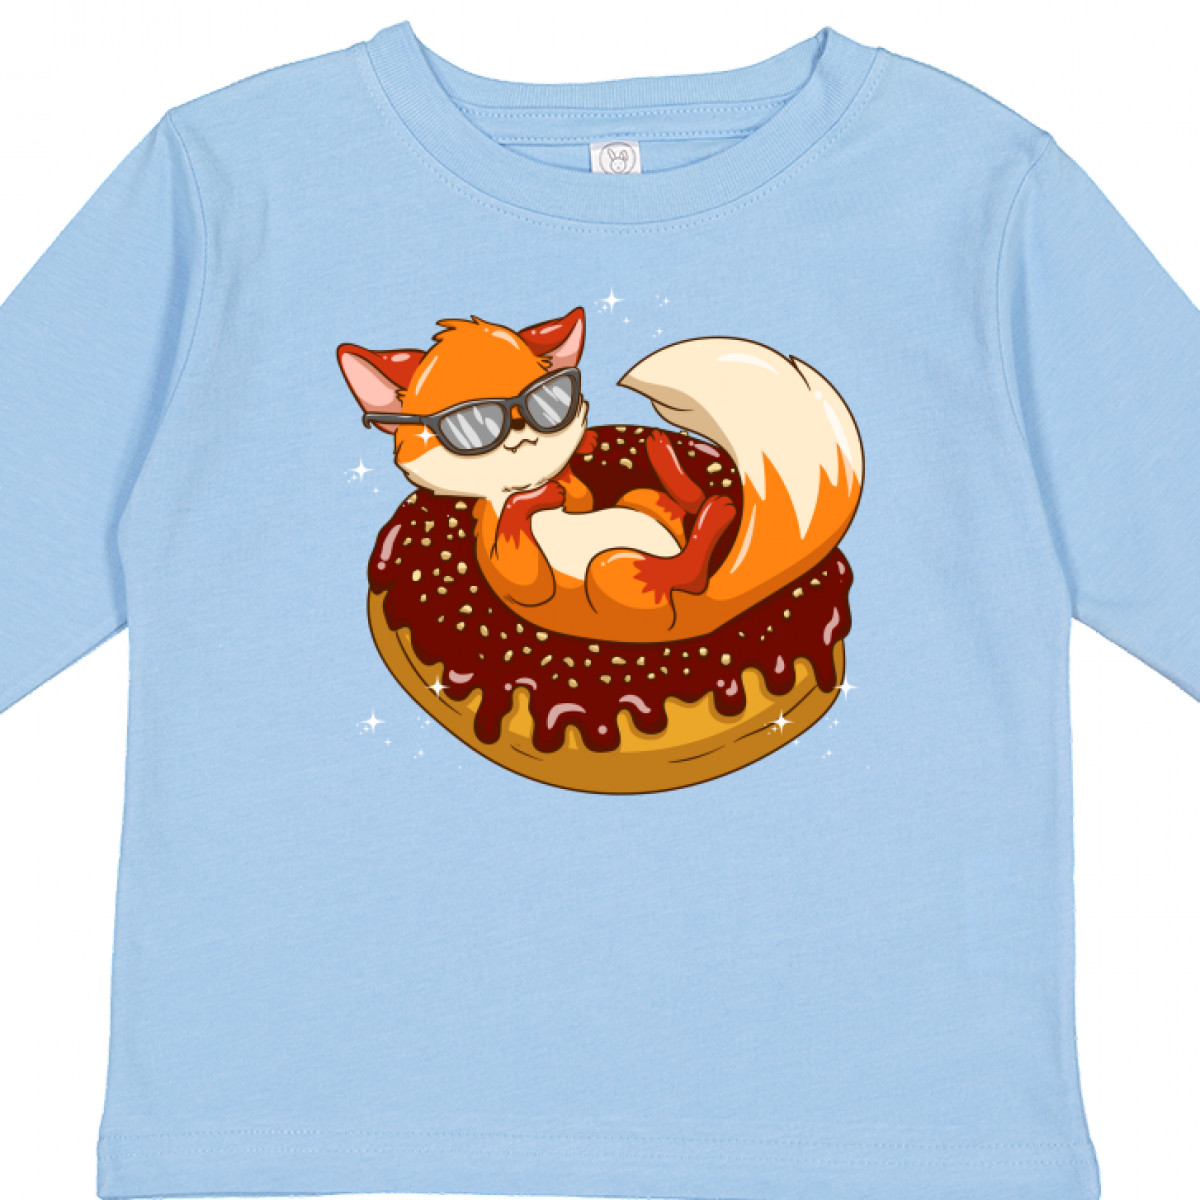 Inktastic Fox Funny Donut Lover Boys or Girls Long Sleeve Toddler T-Shirt - image 3 of 4